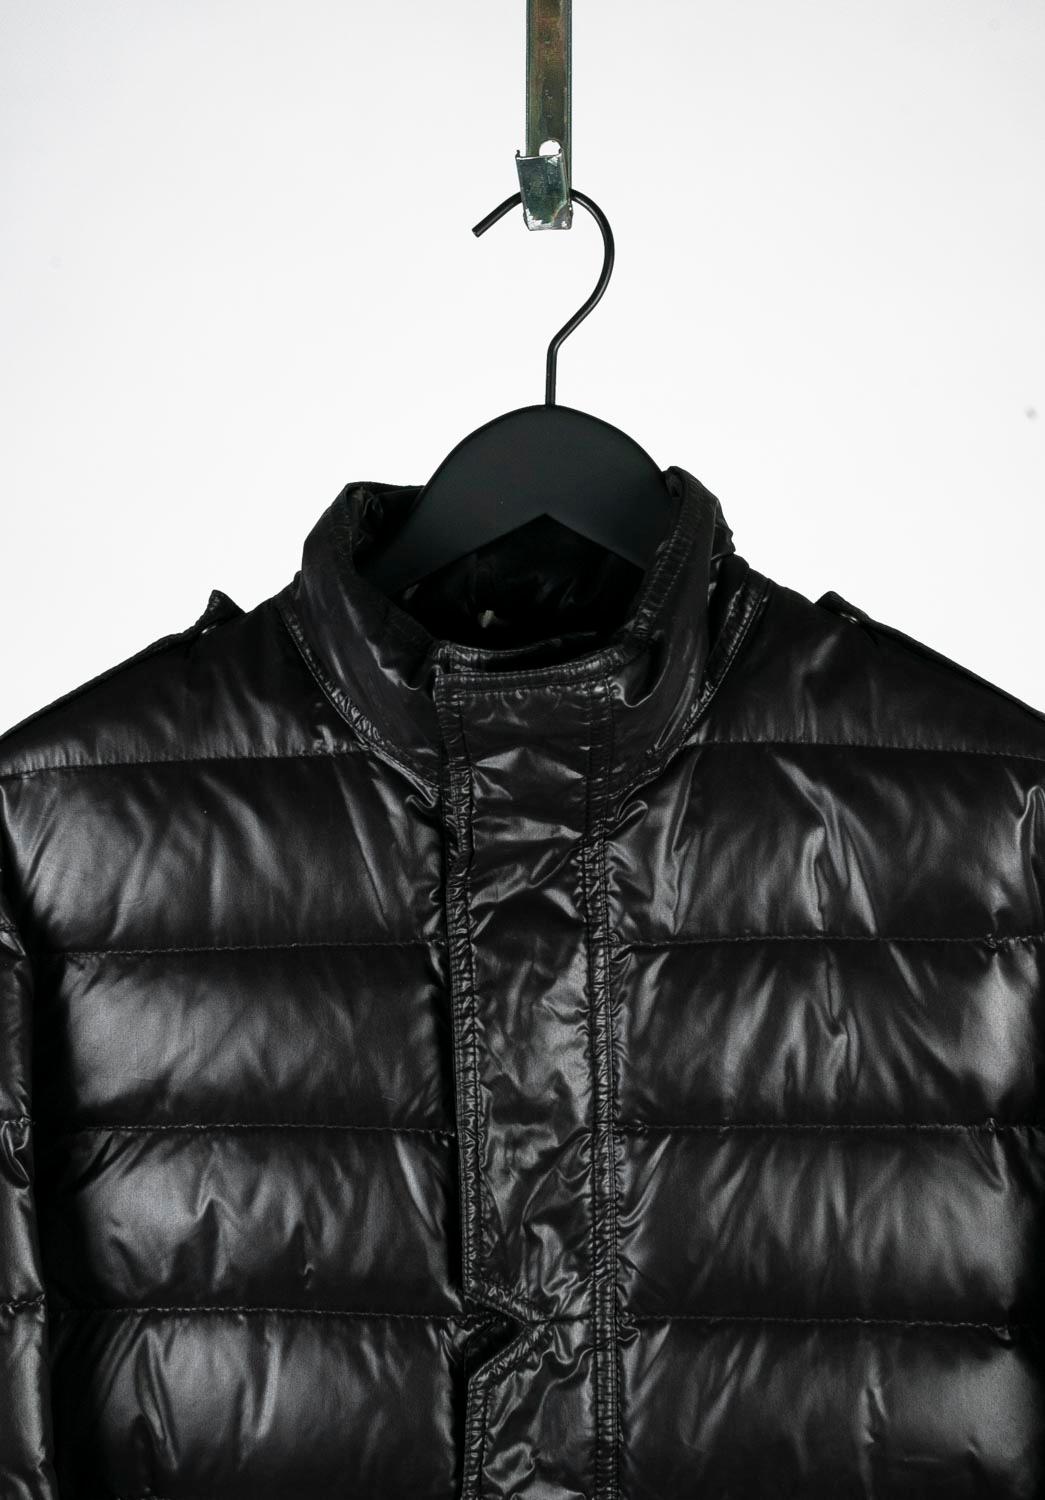 100% genuine Dior Homme AW07 Down Men Jacket 
Color: Black
(An actual color may a bit vary due to individual computer screen interpretation)
Material: 100% nylon
Tag size: 48IT (medium)
This jacket is great quality item. Rate 9 of 10,